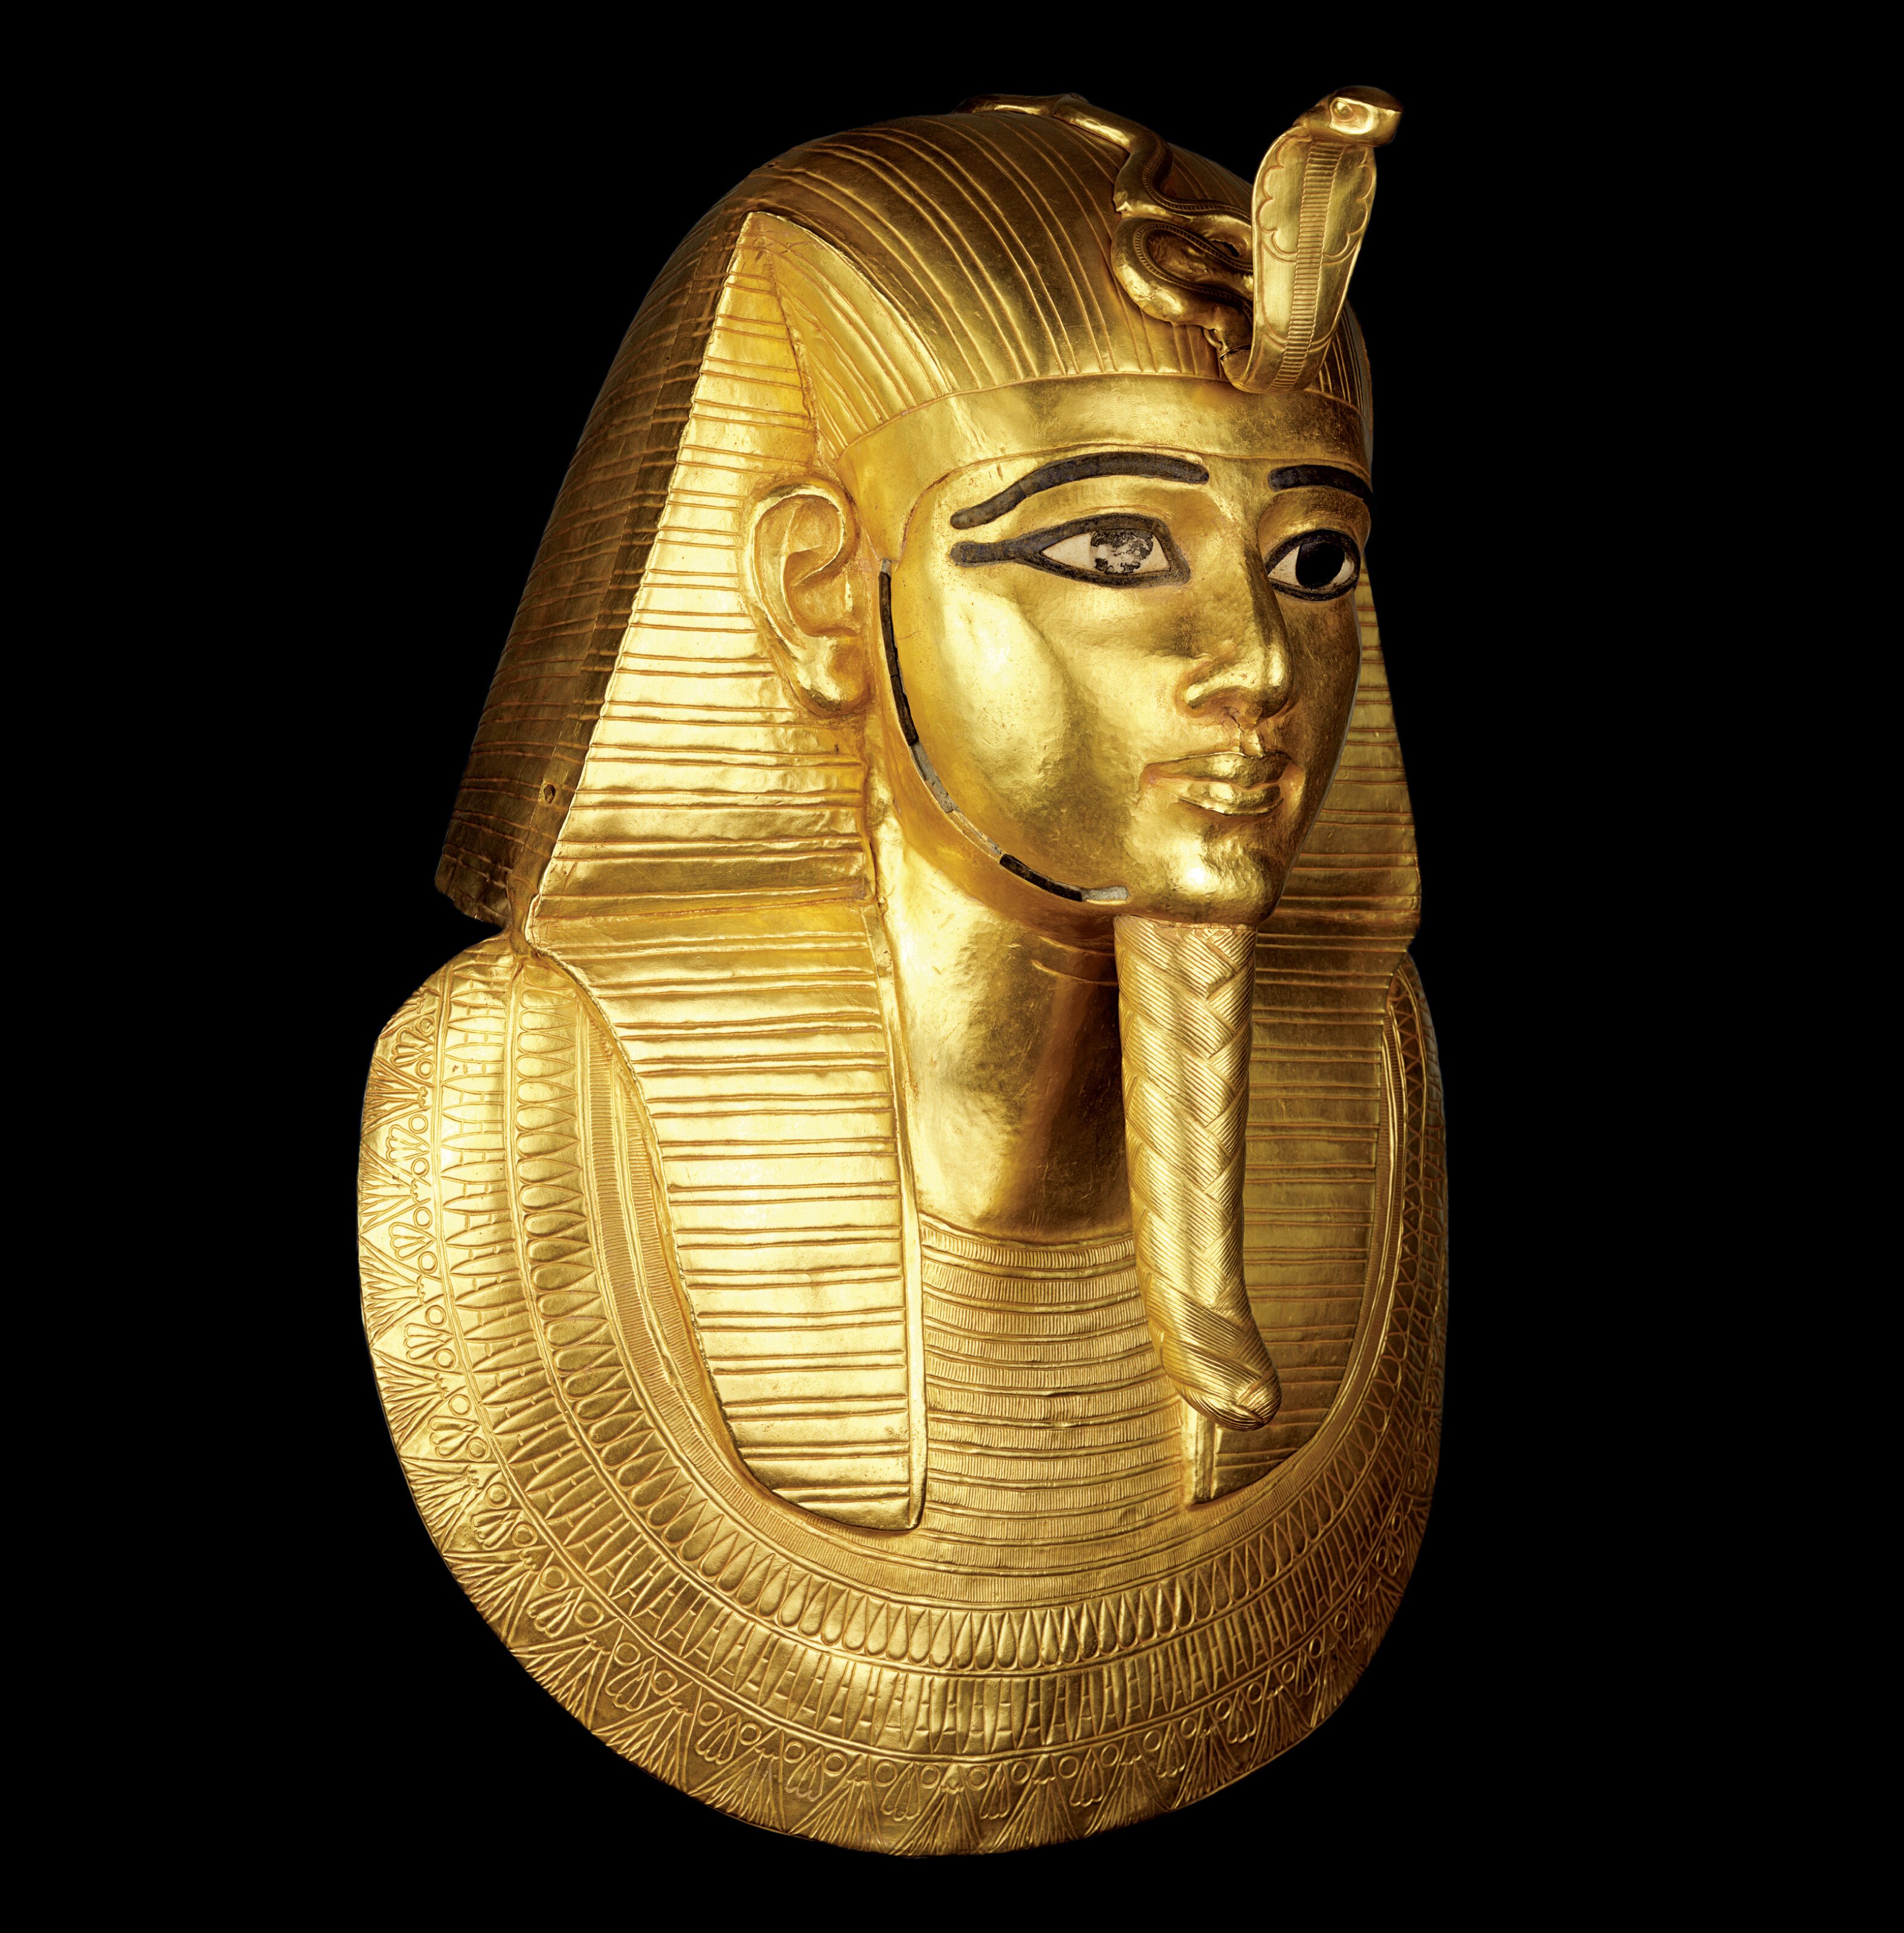 Funerary Mask of Psusennes I: The golden mask lay over the head, chest and part of the shoulders of the mummy of Psusennes, as a layer of protection. The royal headdress with ureaus cobra and the divine false beard he wears attested to his royal and godly status. The use of gold, considered the flesh of the gods, reaffirmed his divinity in the afterlife. All photographs © Sandro Vannini, care of National Geographic.